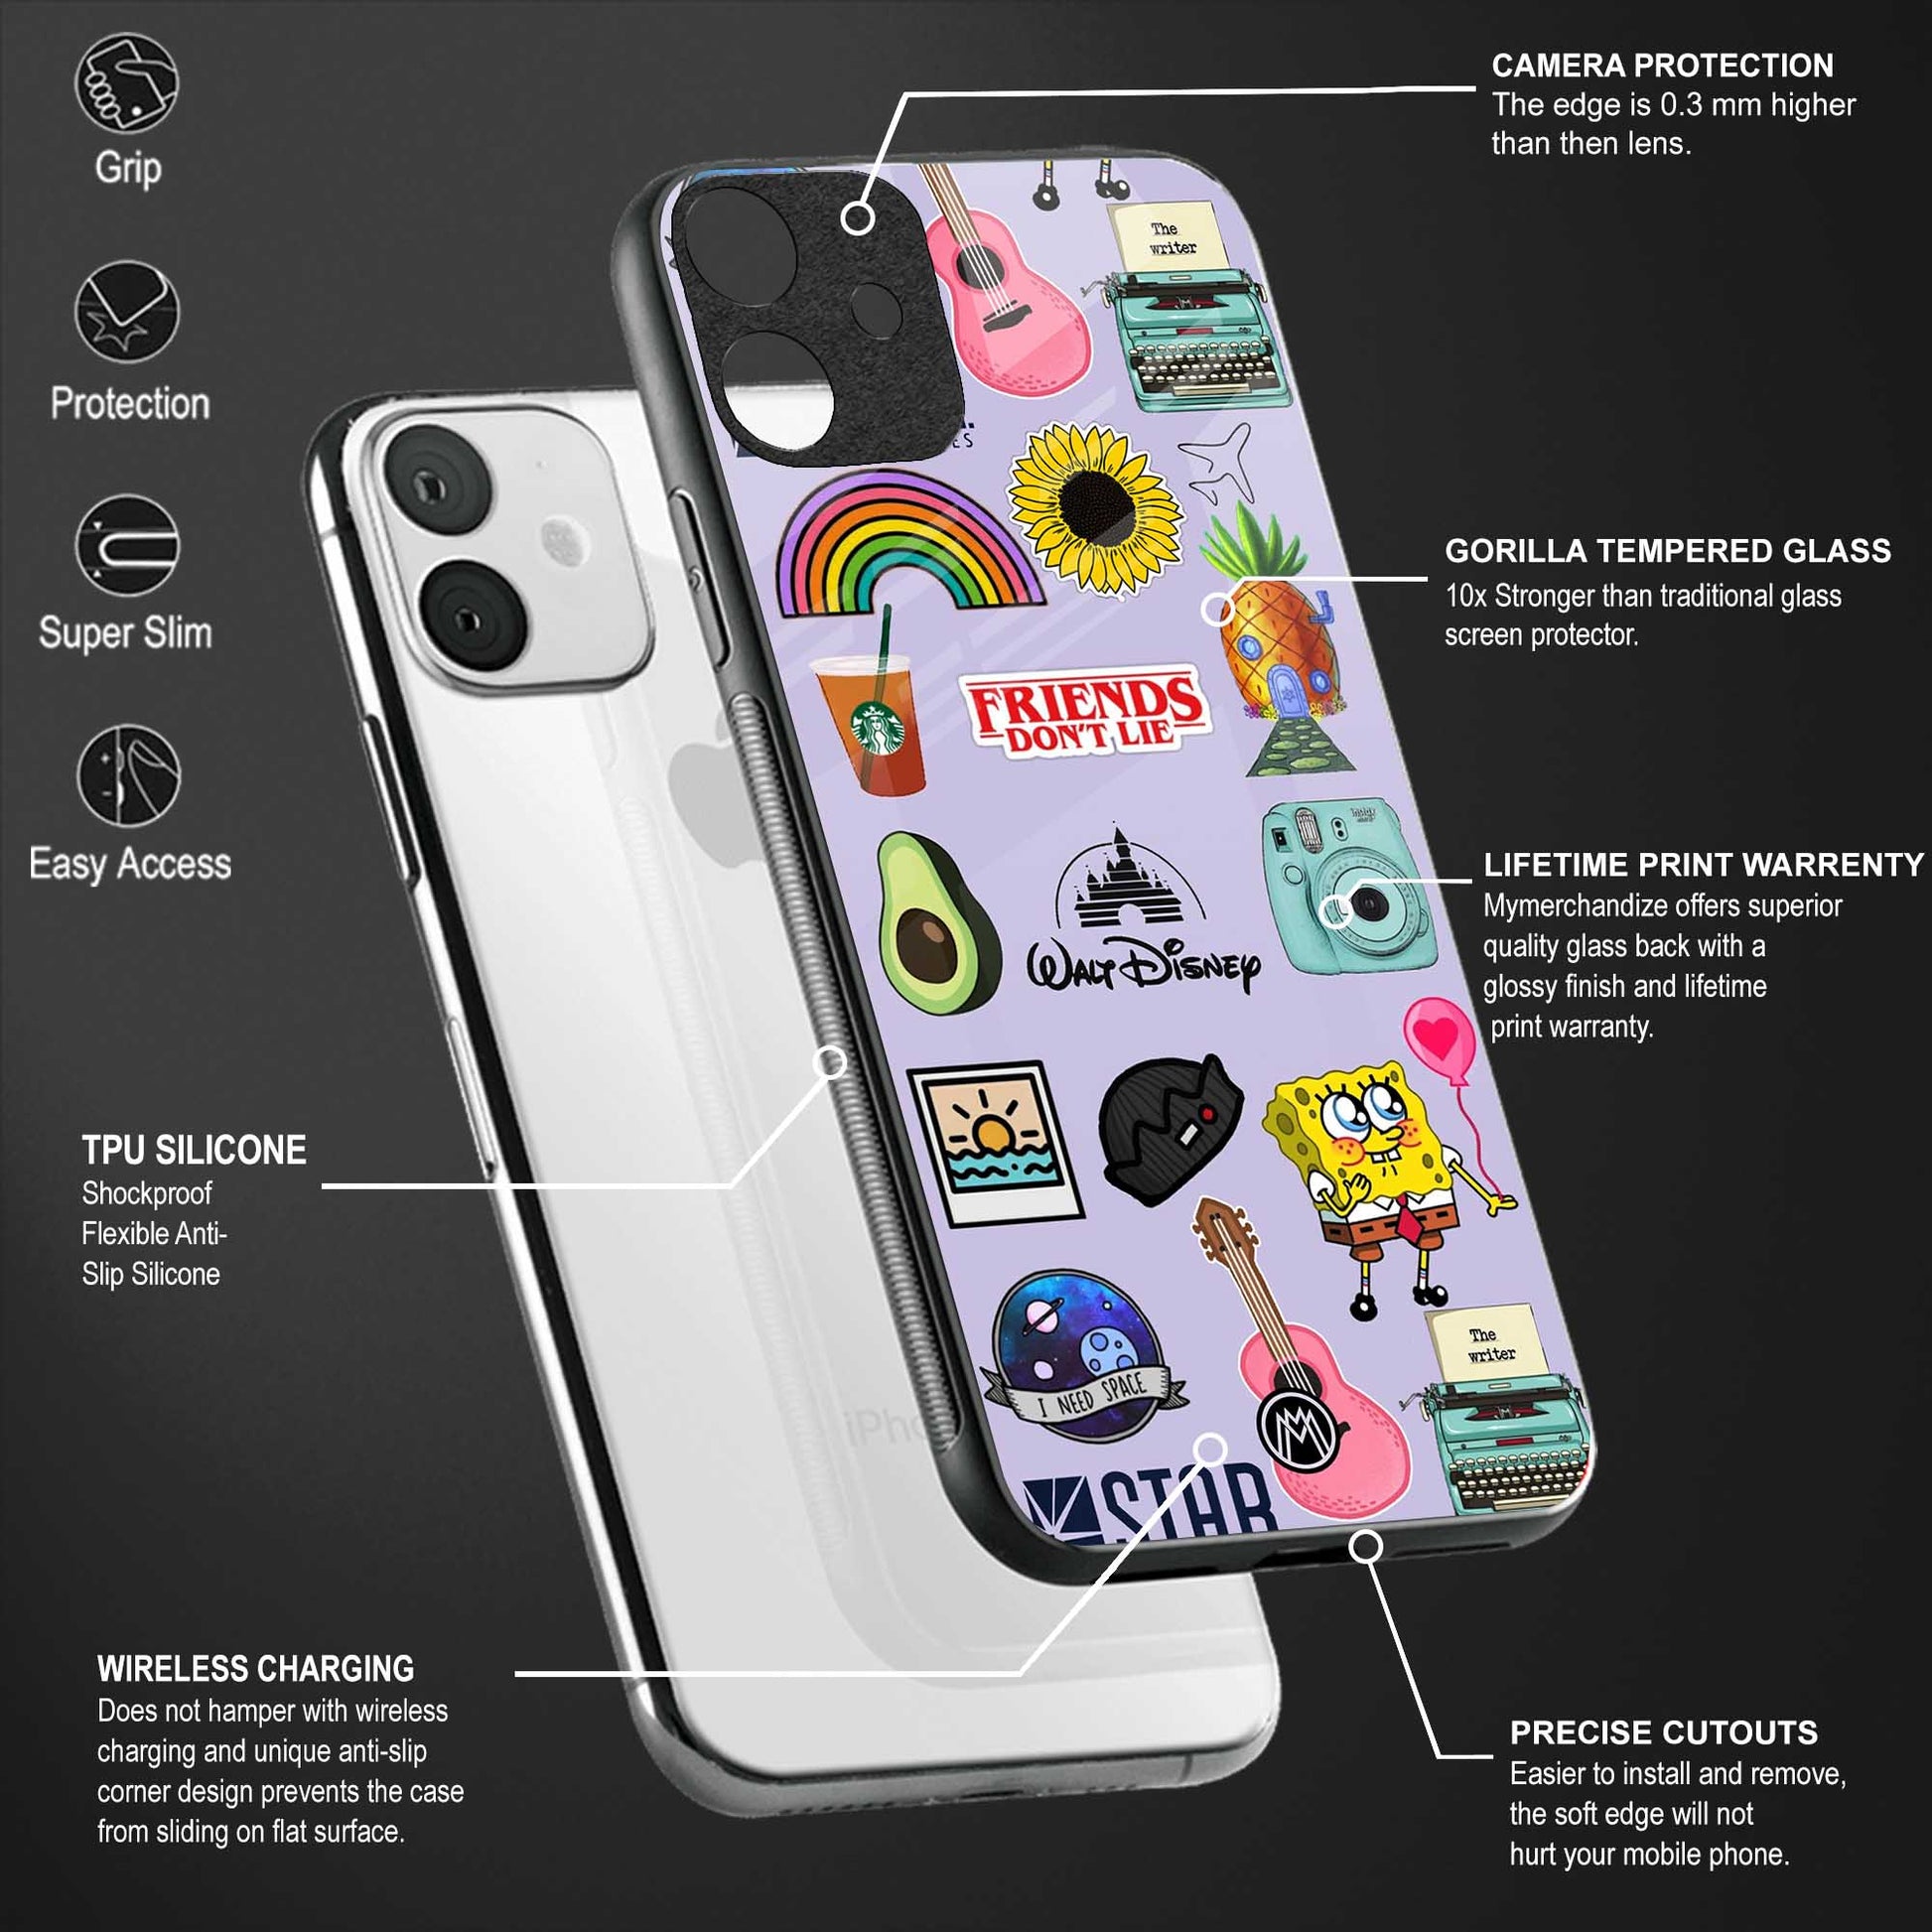 HYPEBEAST BRAND COLLAGE iPhone 14 Pro Max Case Cover